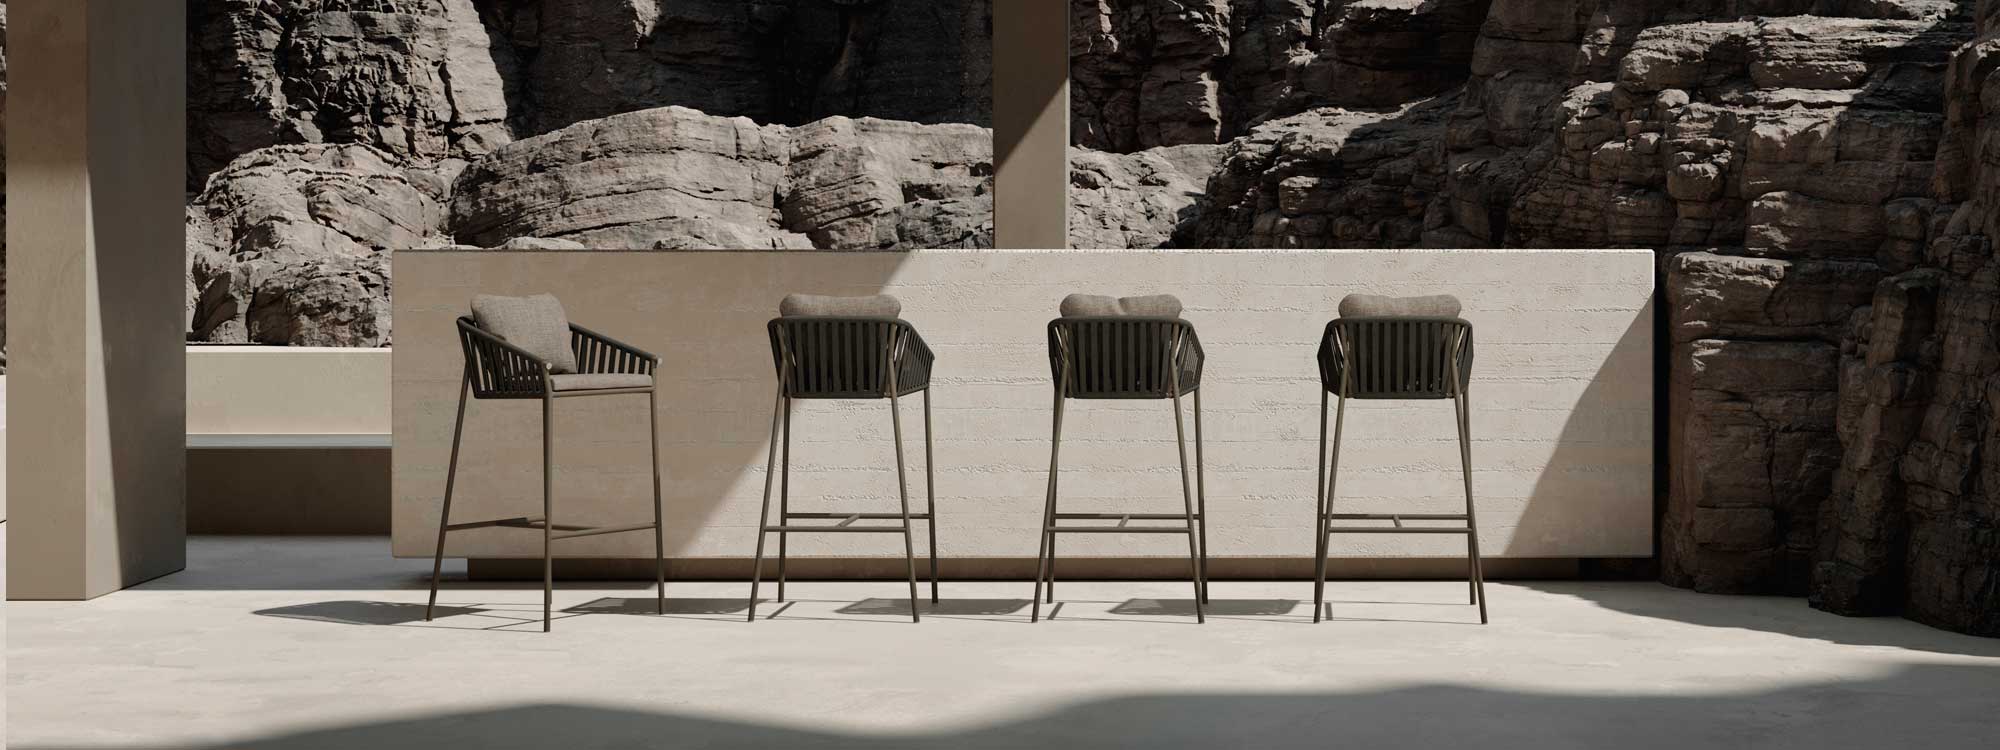 Image of 4 Oiside Twist modern garden bar chairs against bar with raw design, with rockface in the background